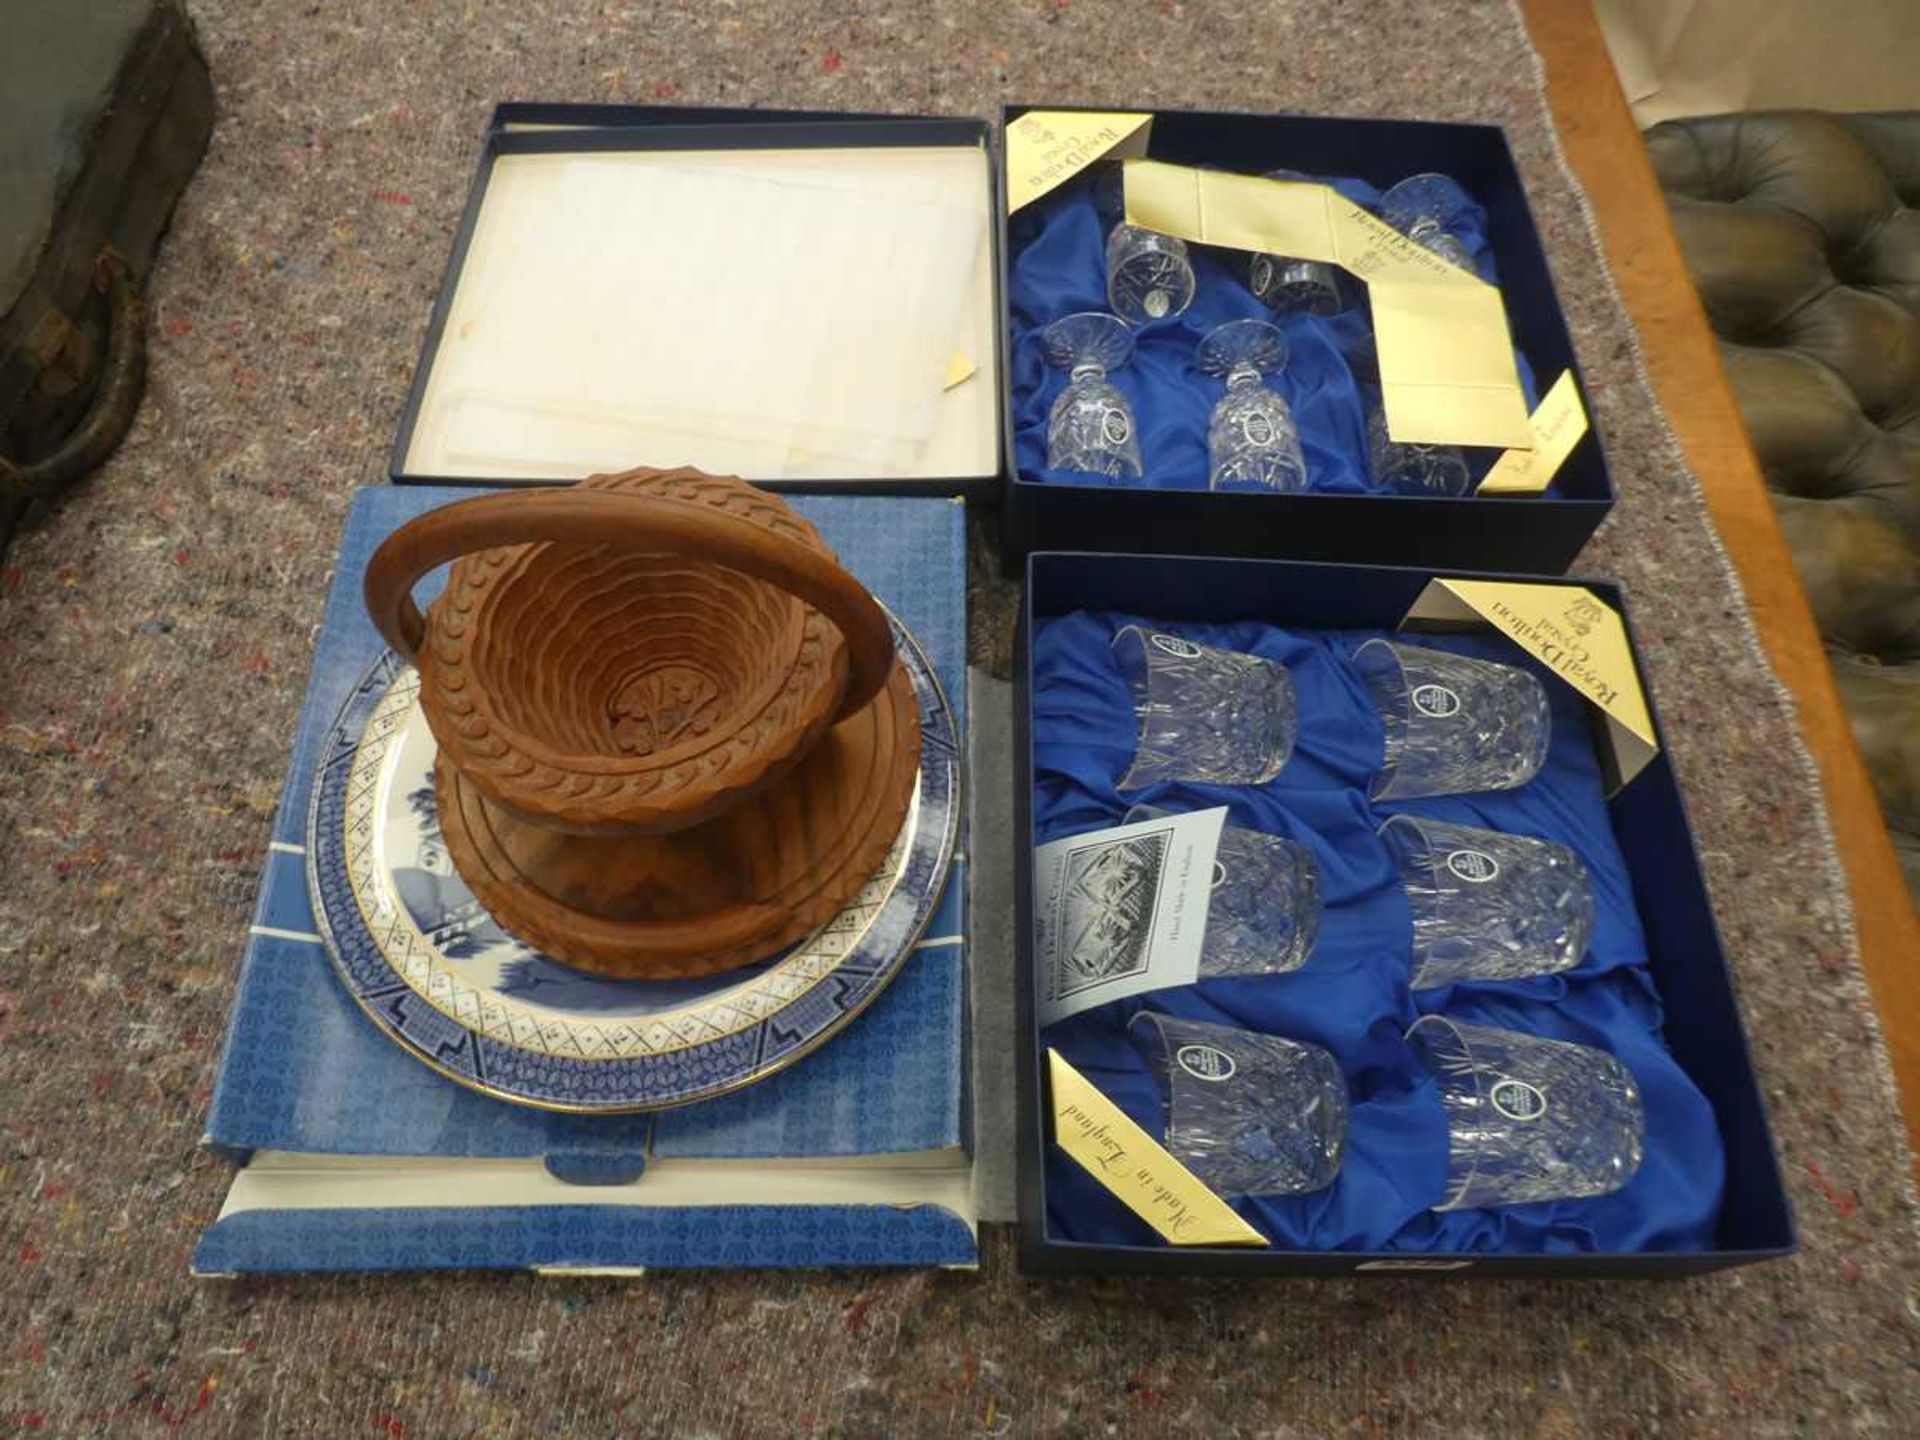 Two boxed sets of Royal Doulton Crystal glasses plus a blue and white Doulton cake plate and a